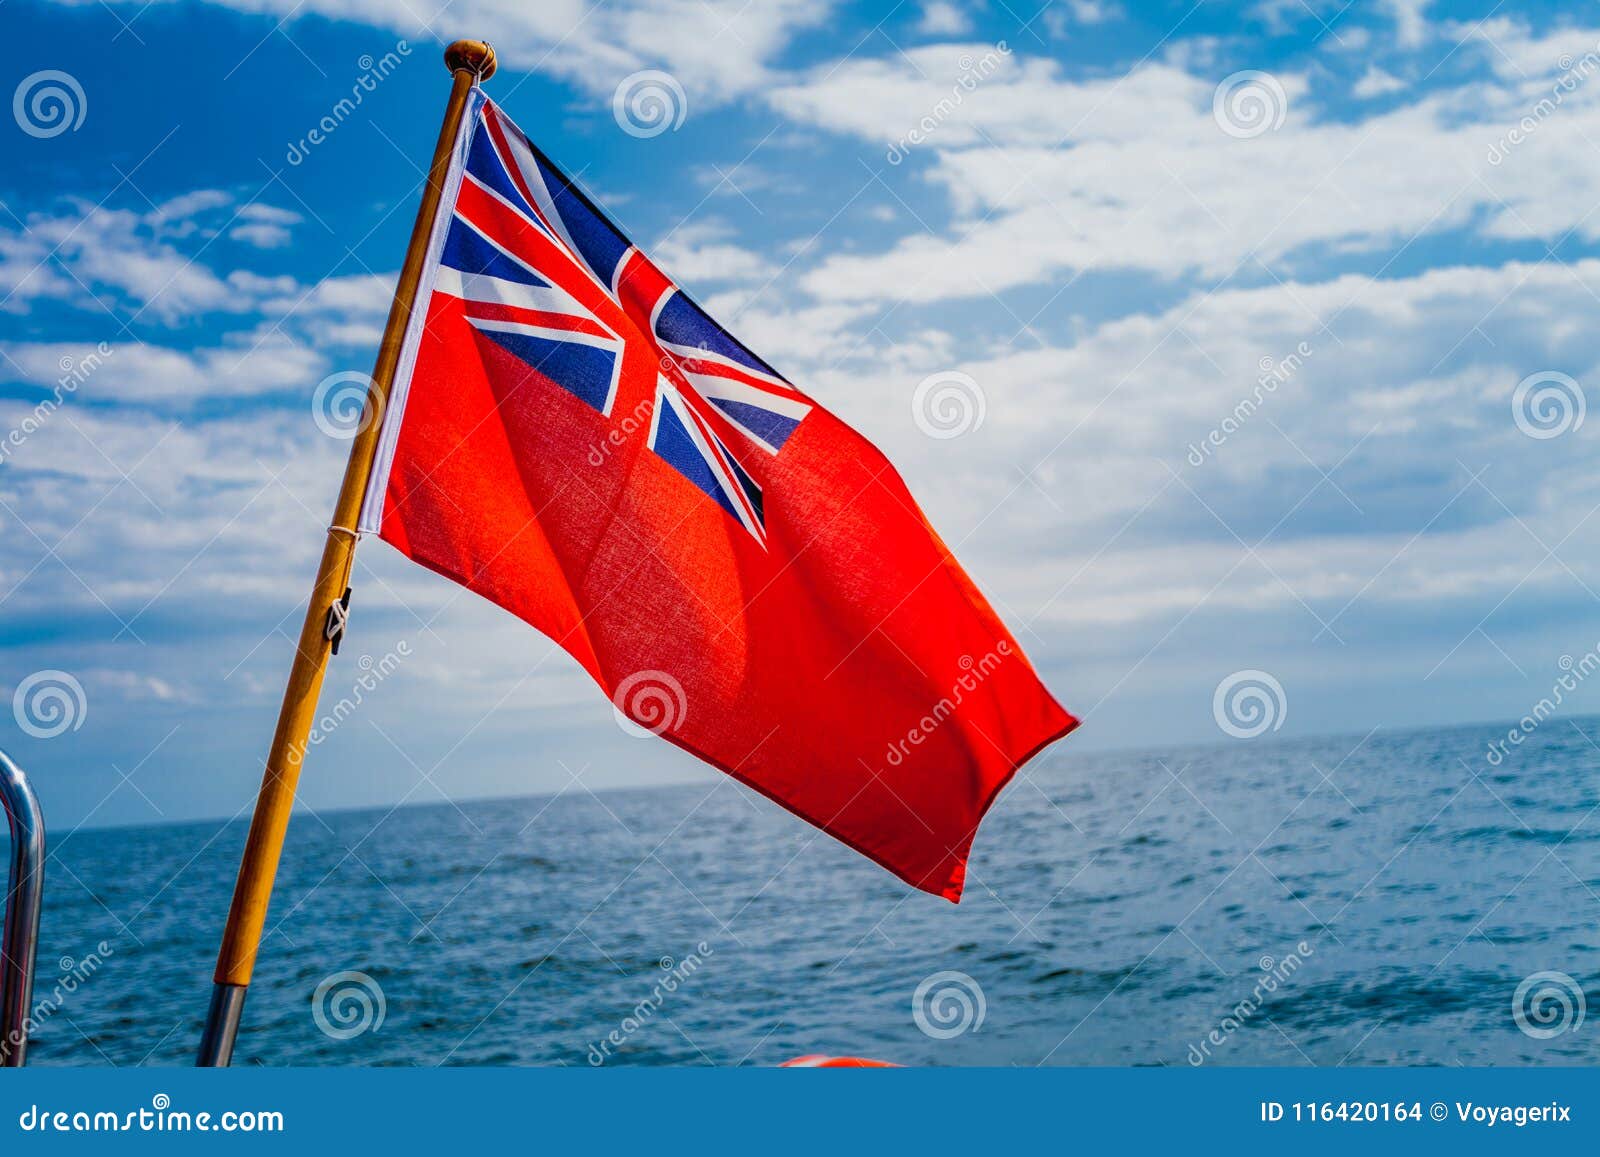 uk red ensign the british maritime flag flown from yacht